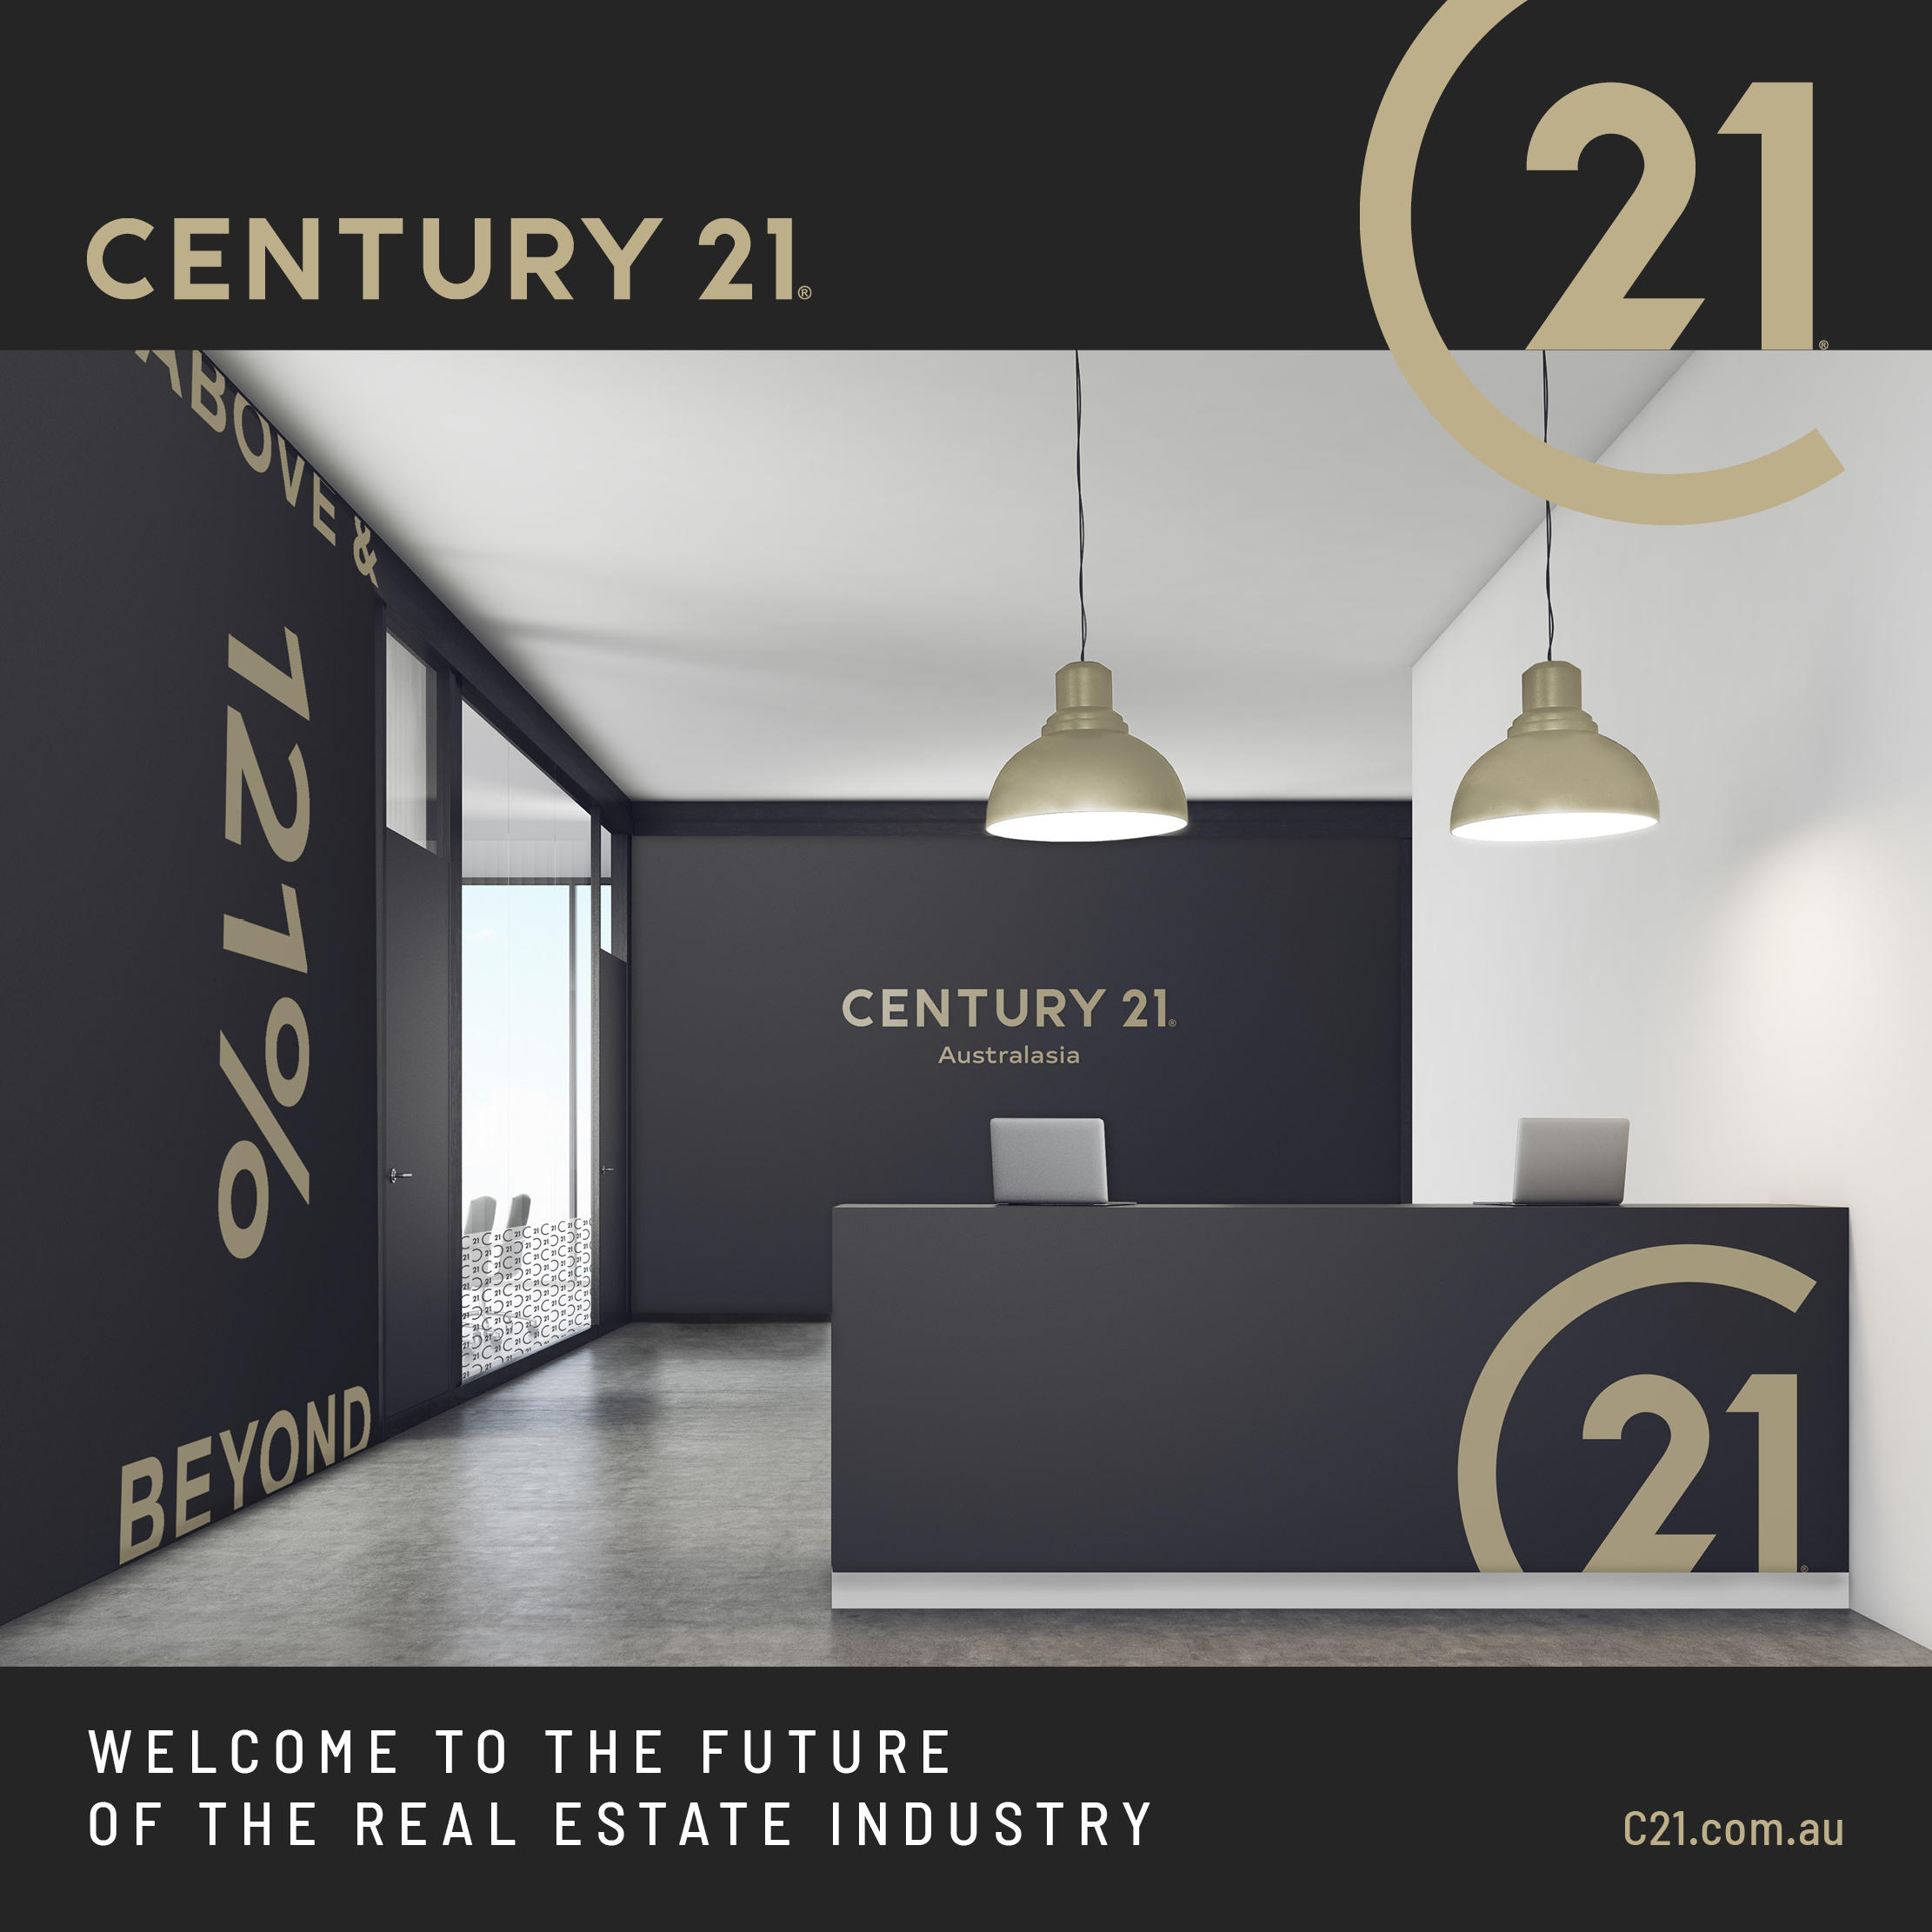 Images Century 21 K P Realty